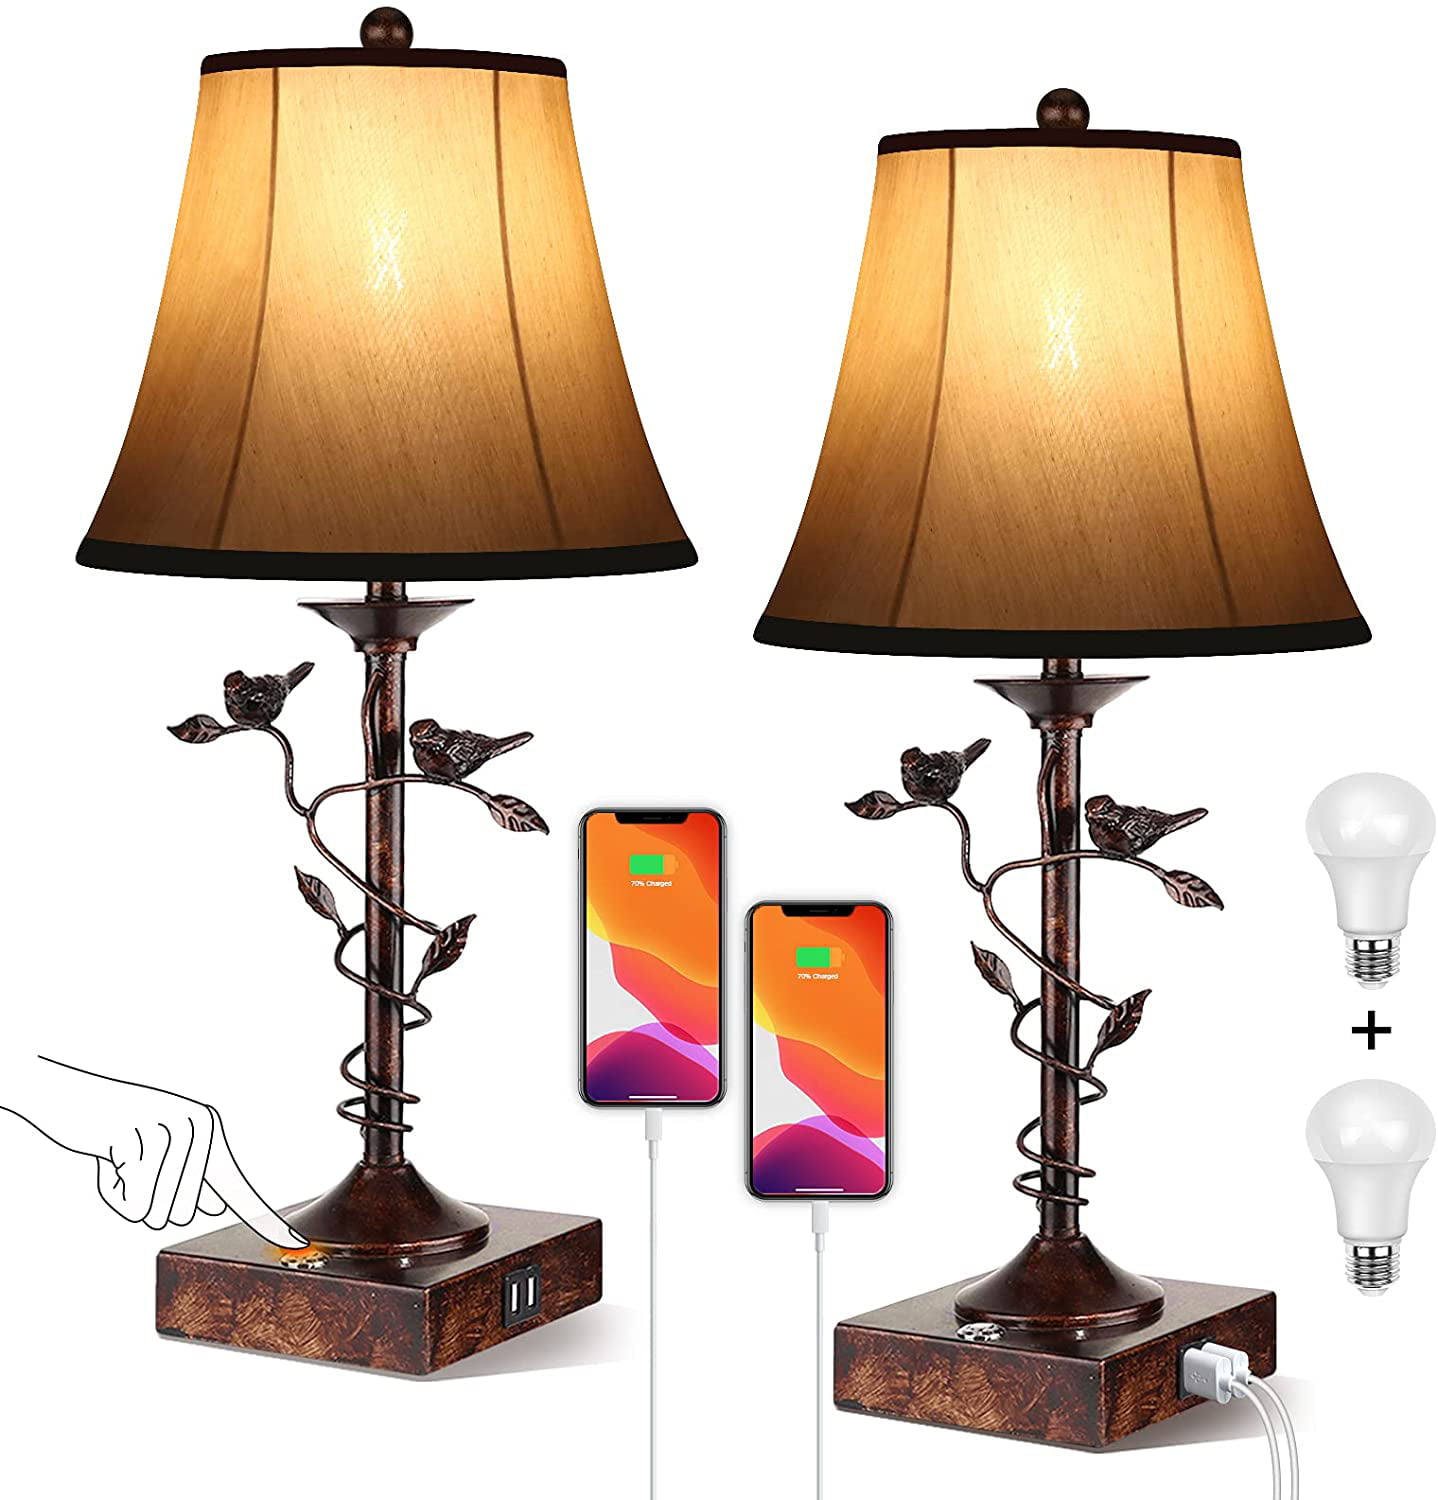 Touch control Vapor Touch Table Lamp with USB Charging Port Custom Made Unique Gifts Vintage Industrial Cage Lamp Antique Brass 